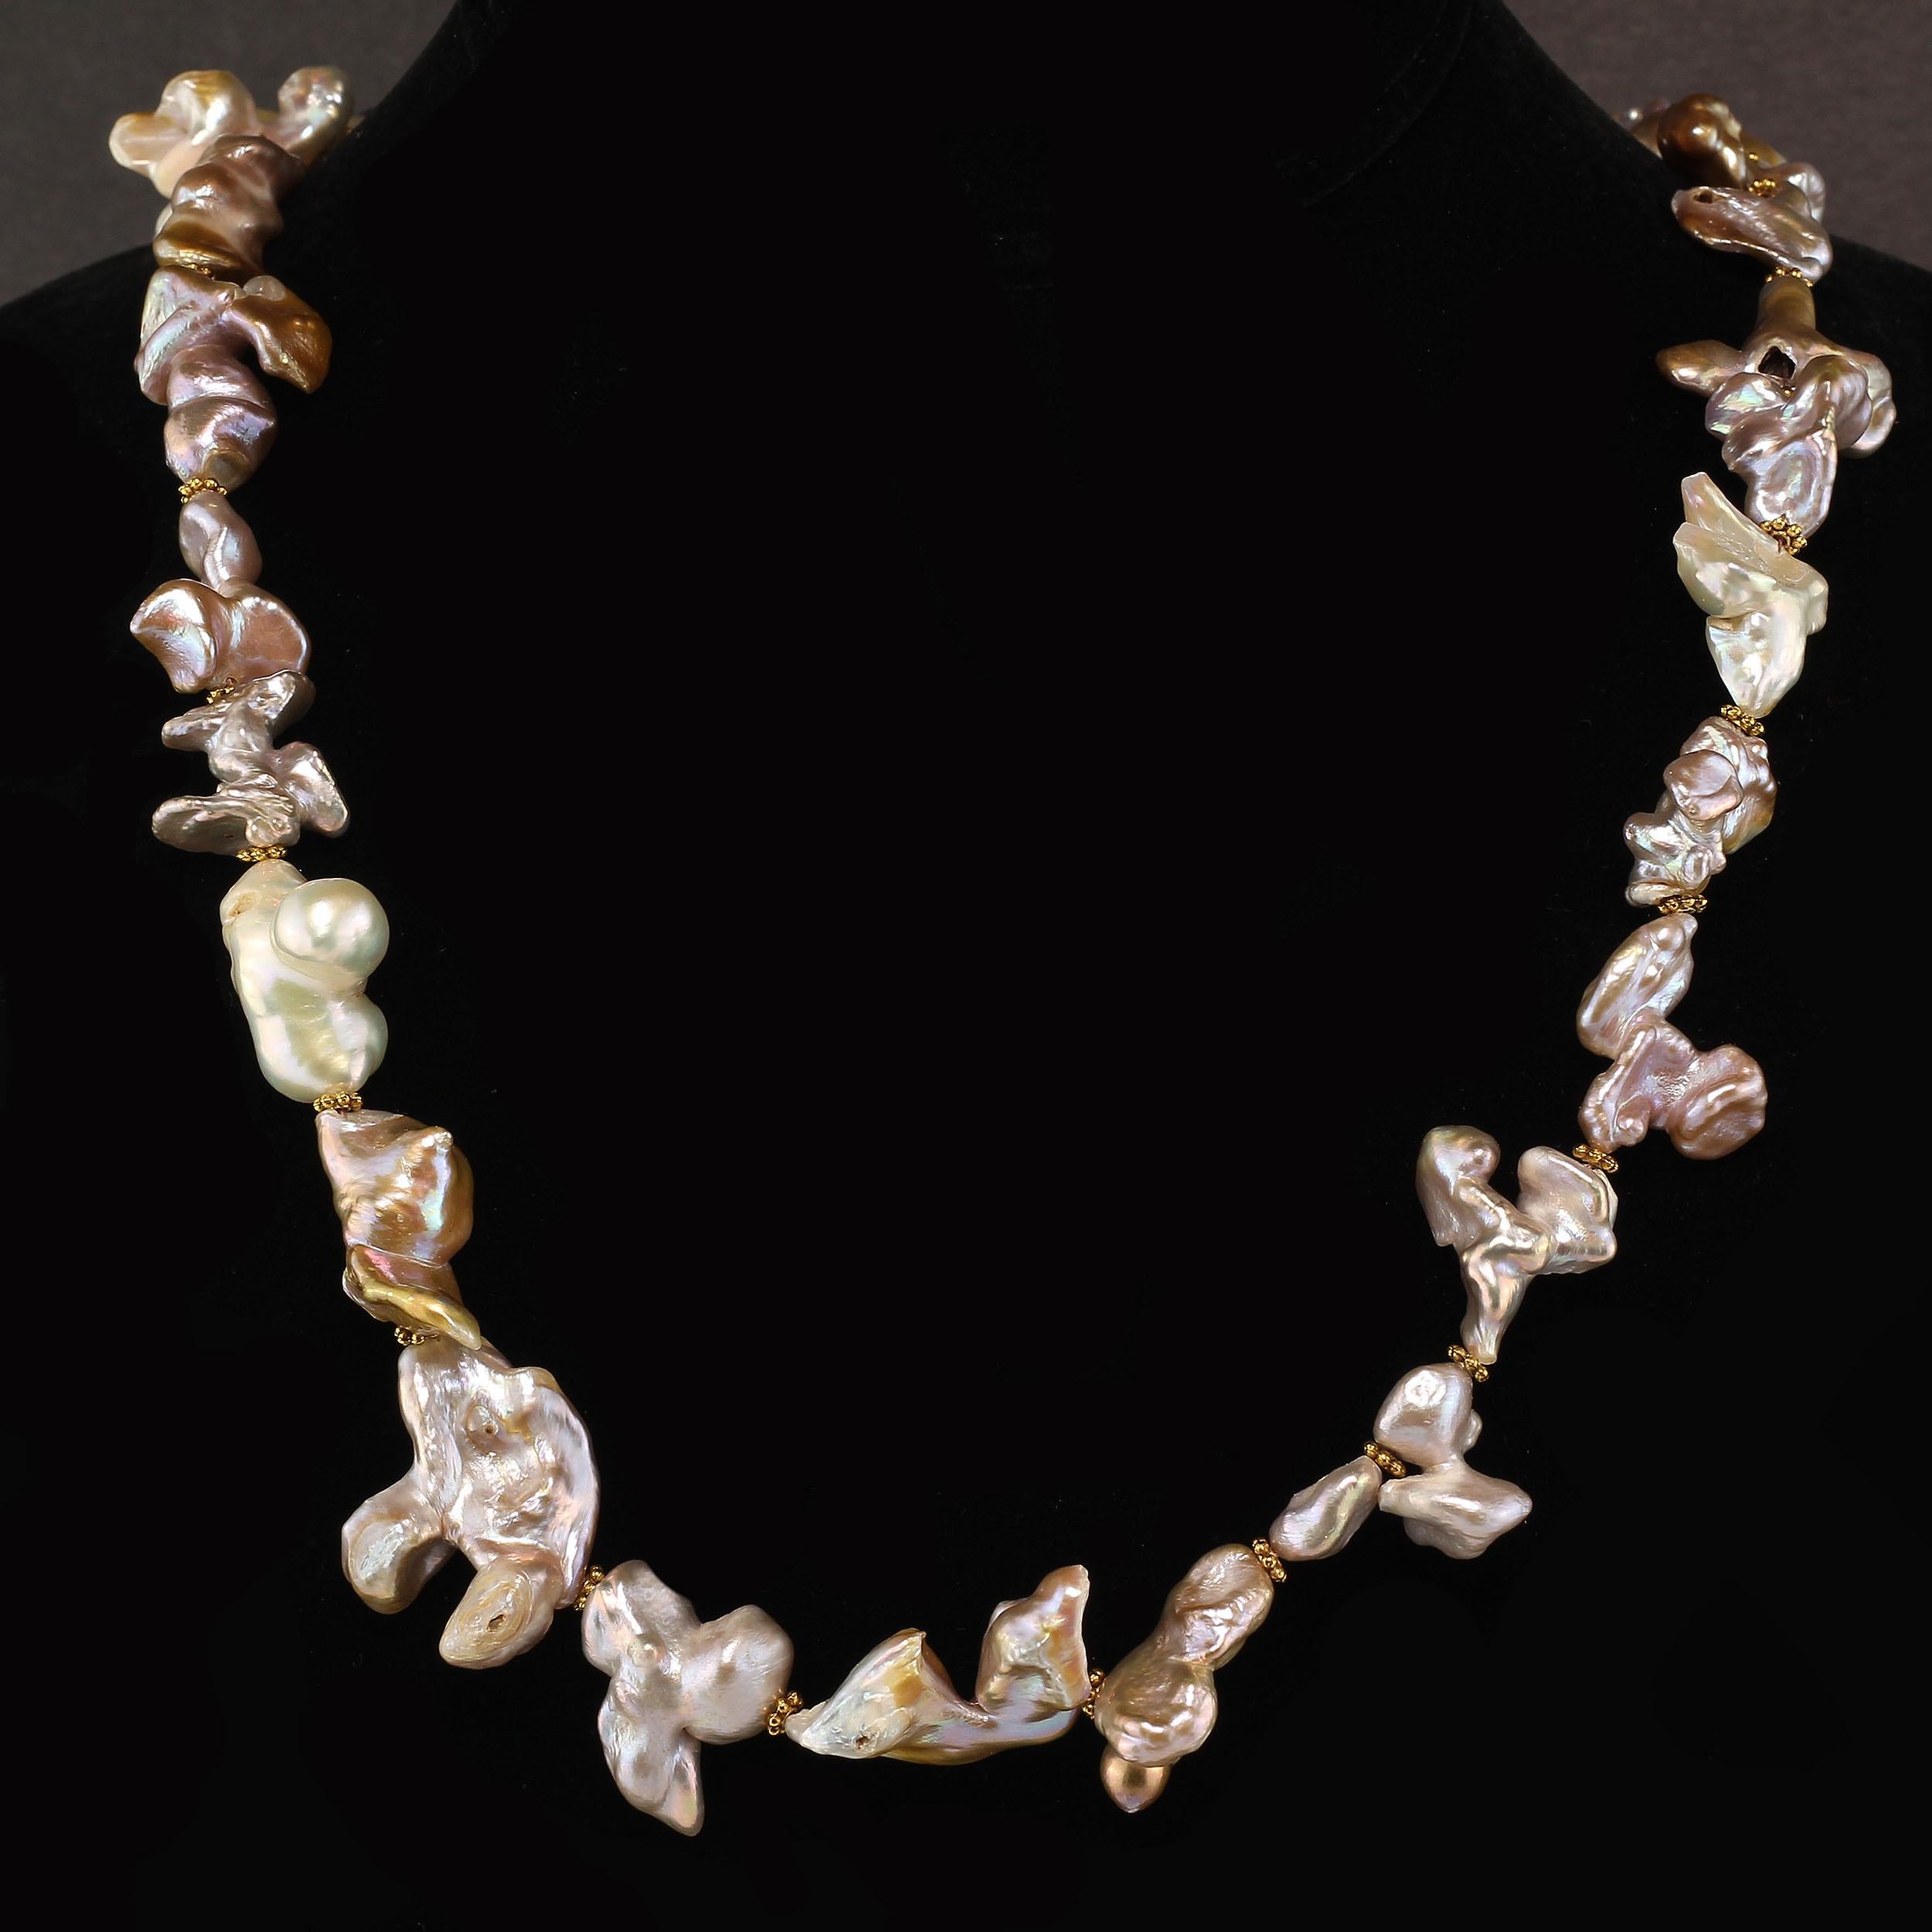 Bead AJD 23 Inch Silvery Freshwater Pearls in Wild Shapes Necklace June Birthstone